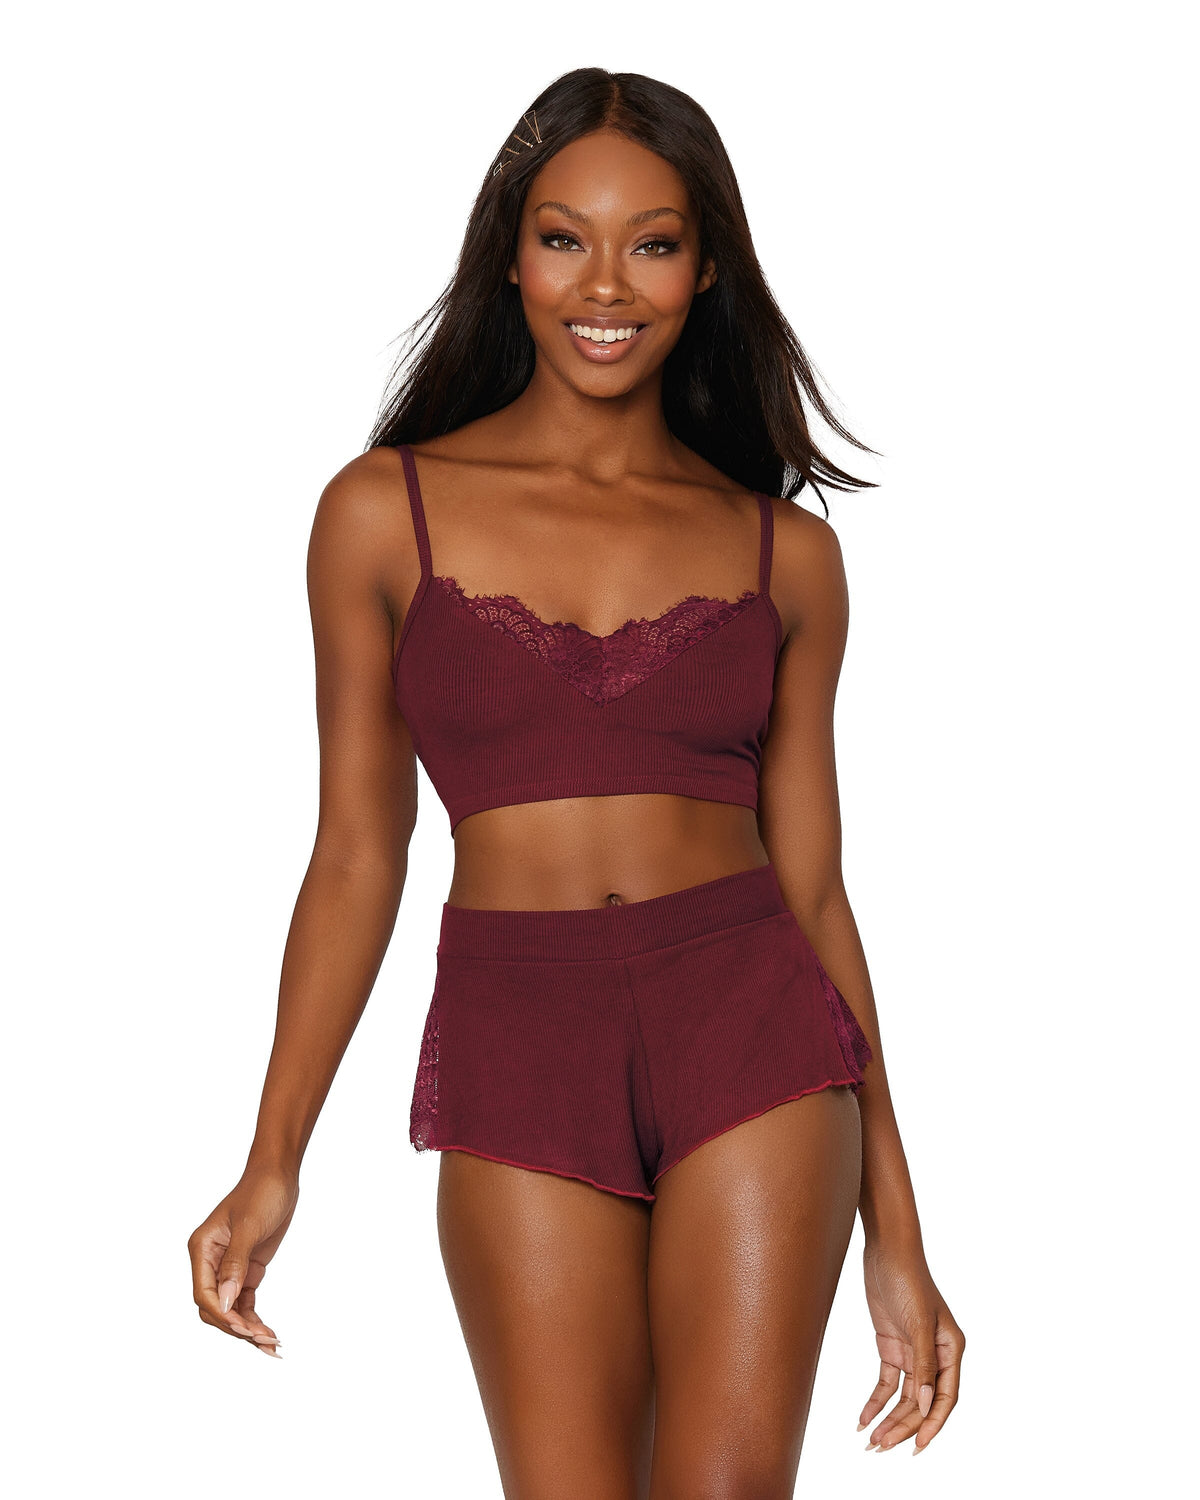 Rib-knit sleepwear bralette and short set with lace inset details Lingerie Dreamgirl International S Burgundy 